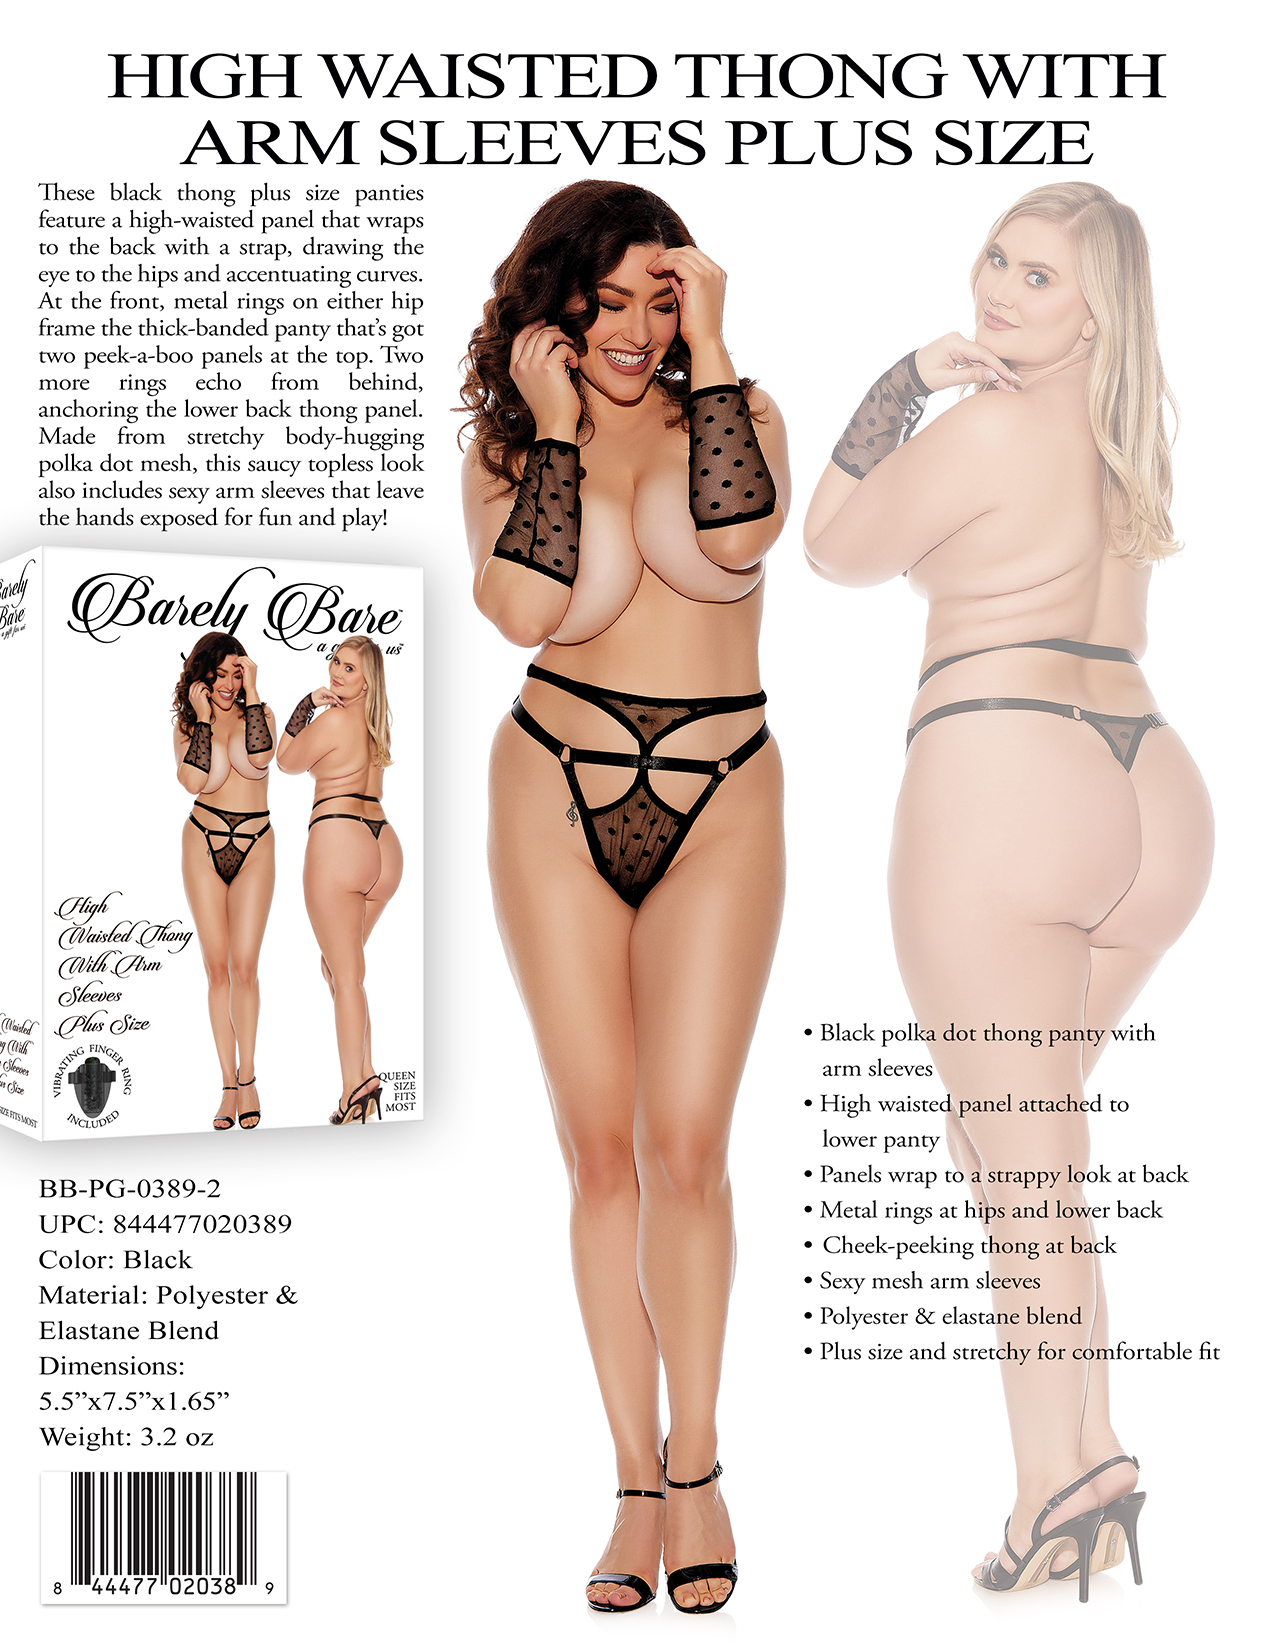 High Waisted Thong with Arm Sleeves Plus Size